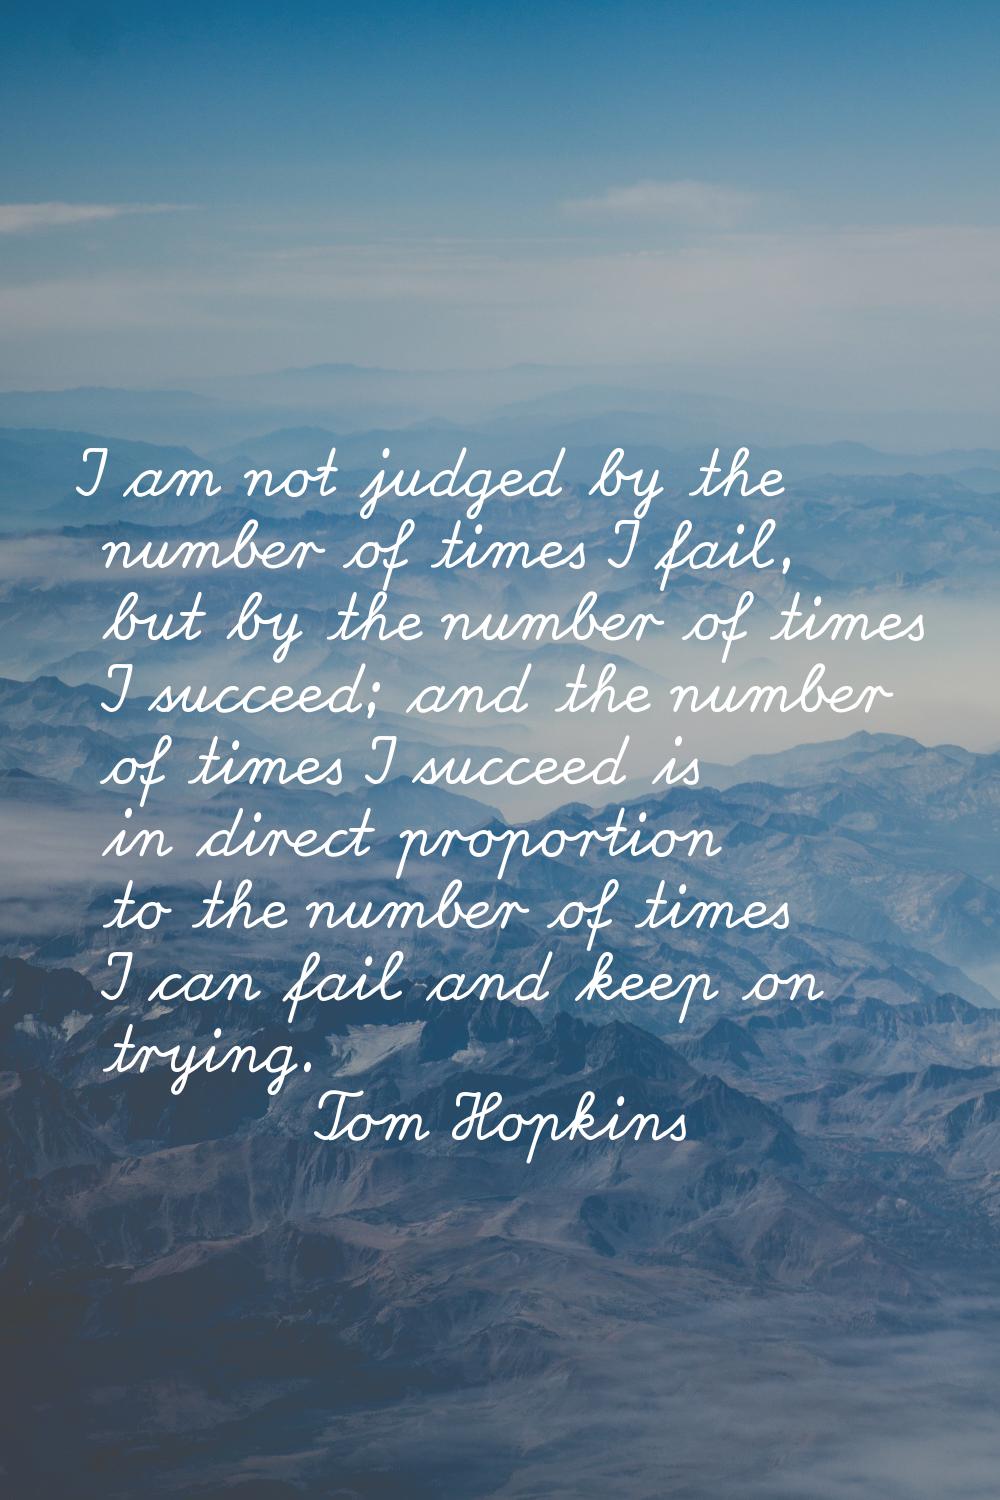 I am not judged by the number of times I fail, but by the number of times I succeed; and the number